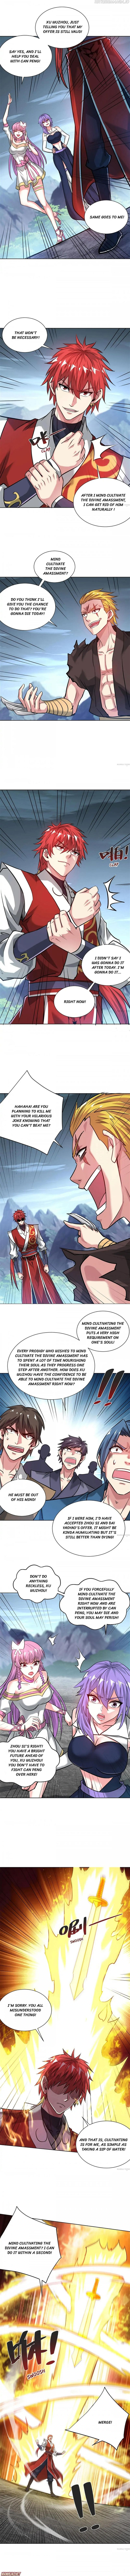 The First Son-In-Law Vanguard of All Time Chapter 253 page 2